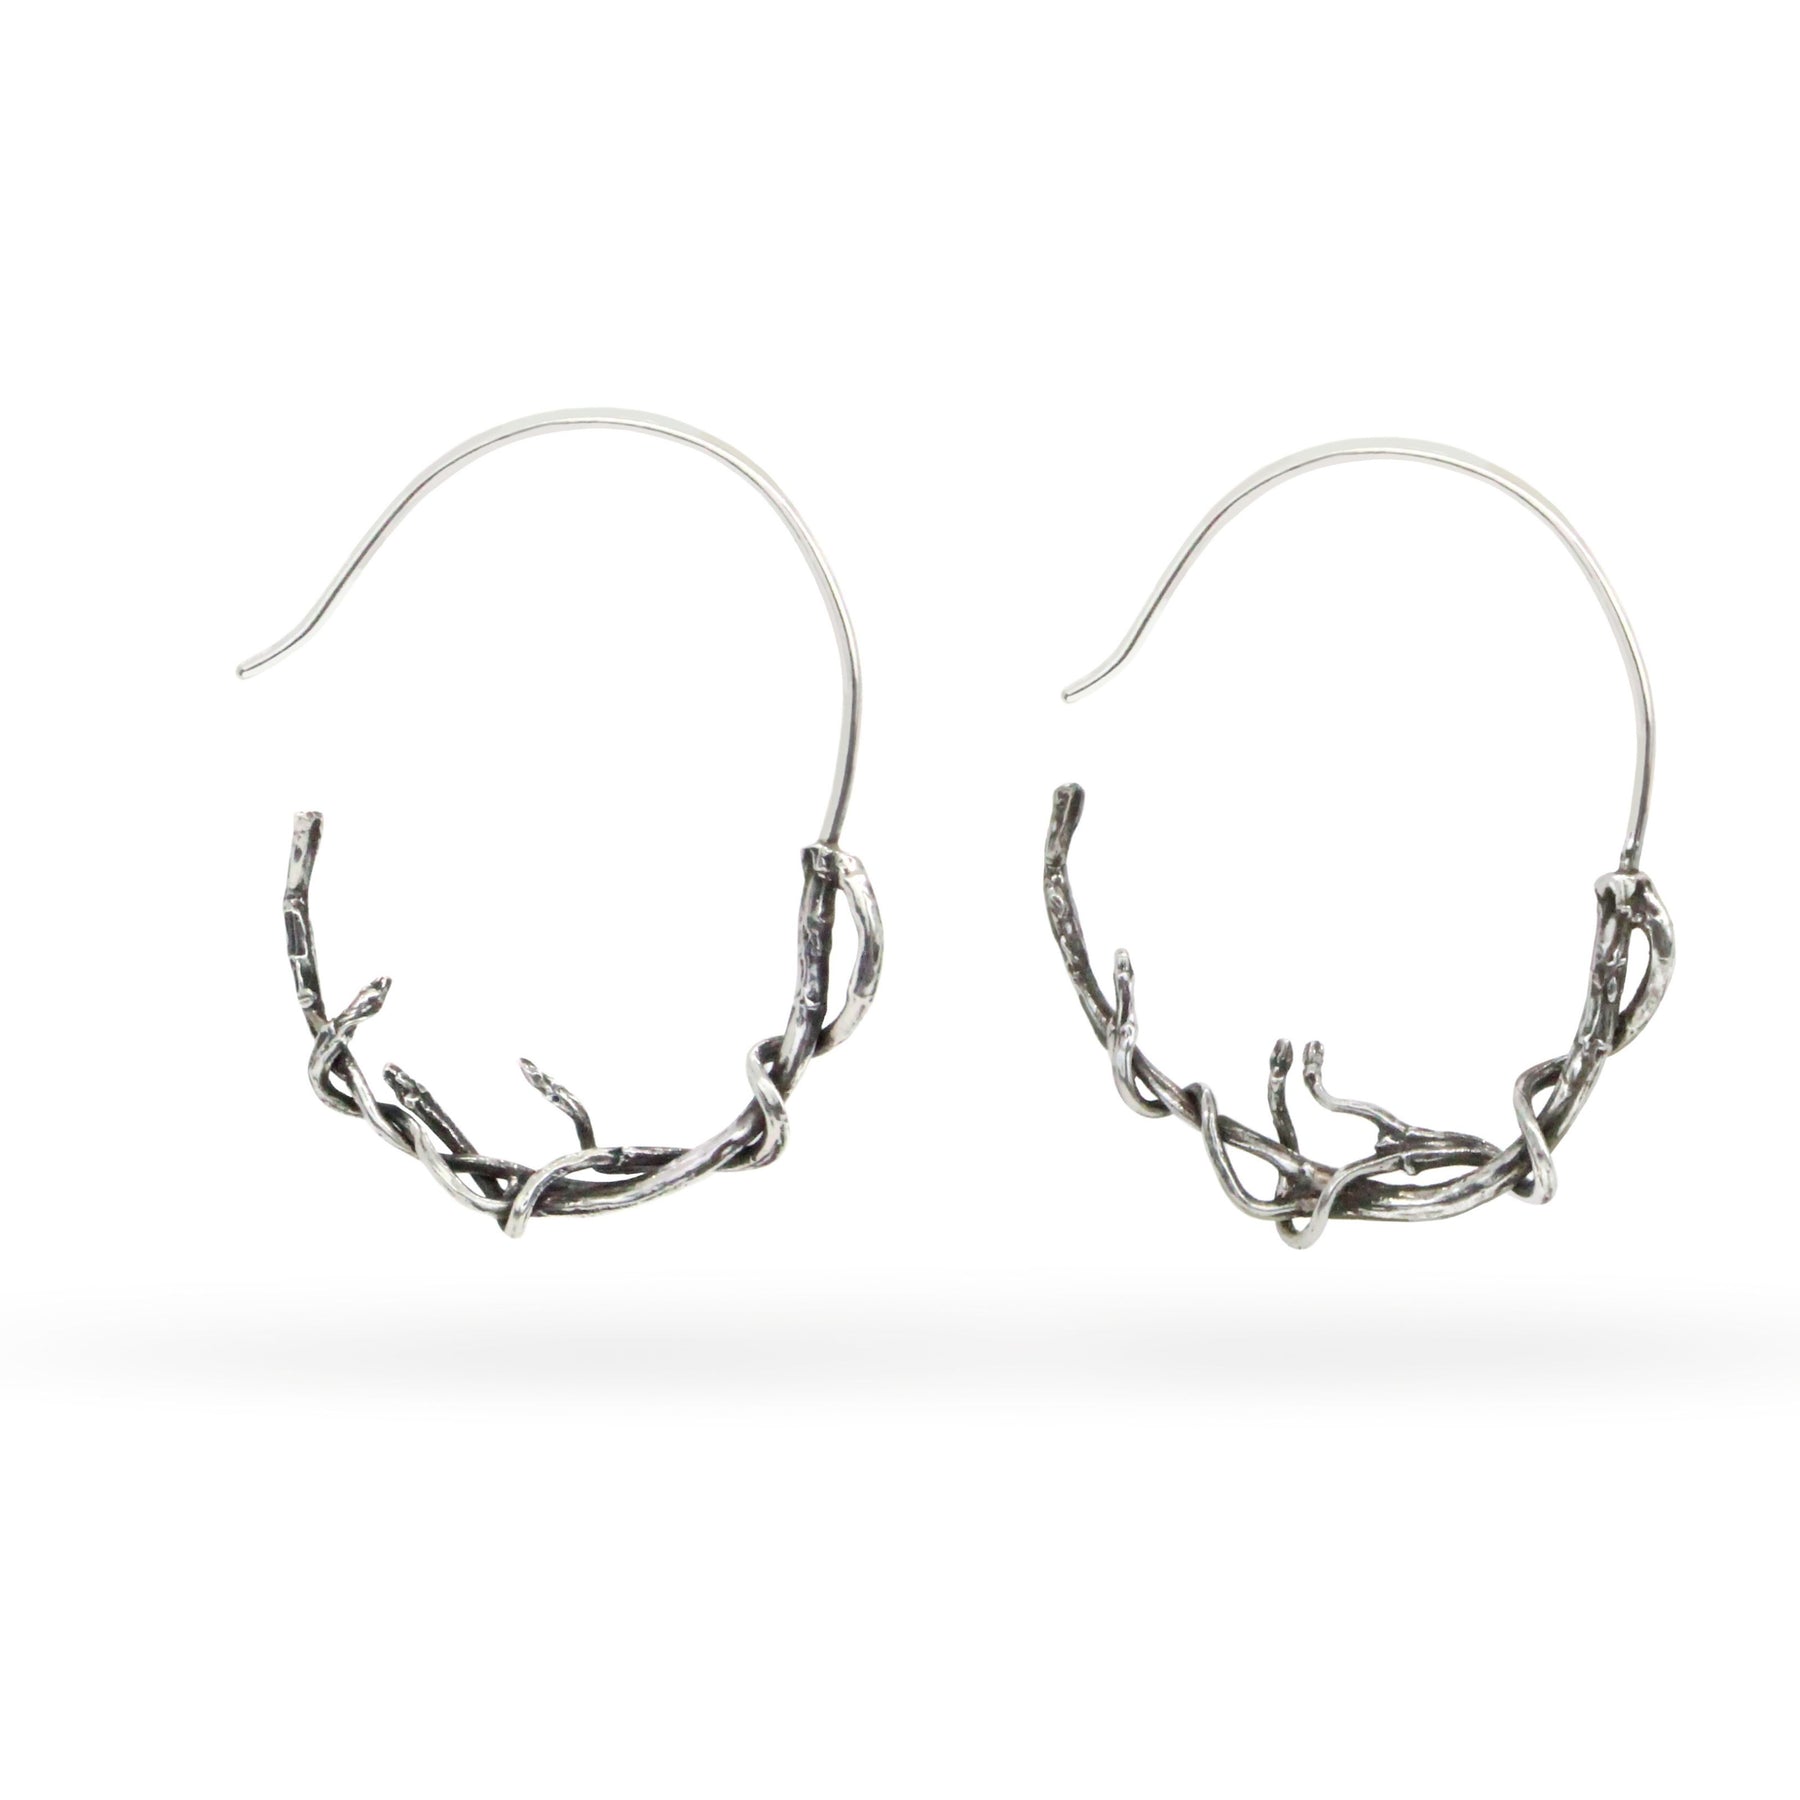 Maleficent Hoops - Susan Rodgers Designs